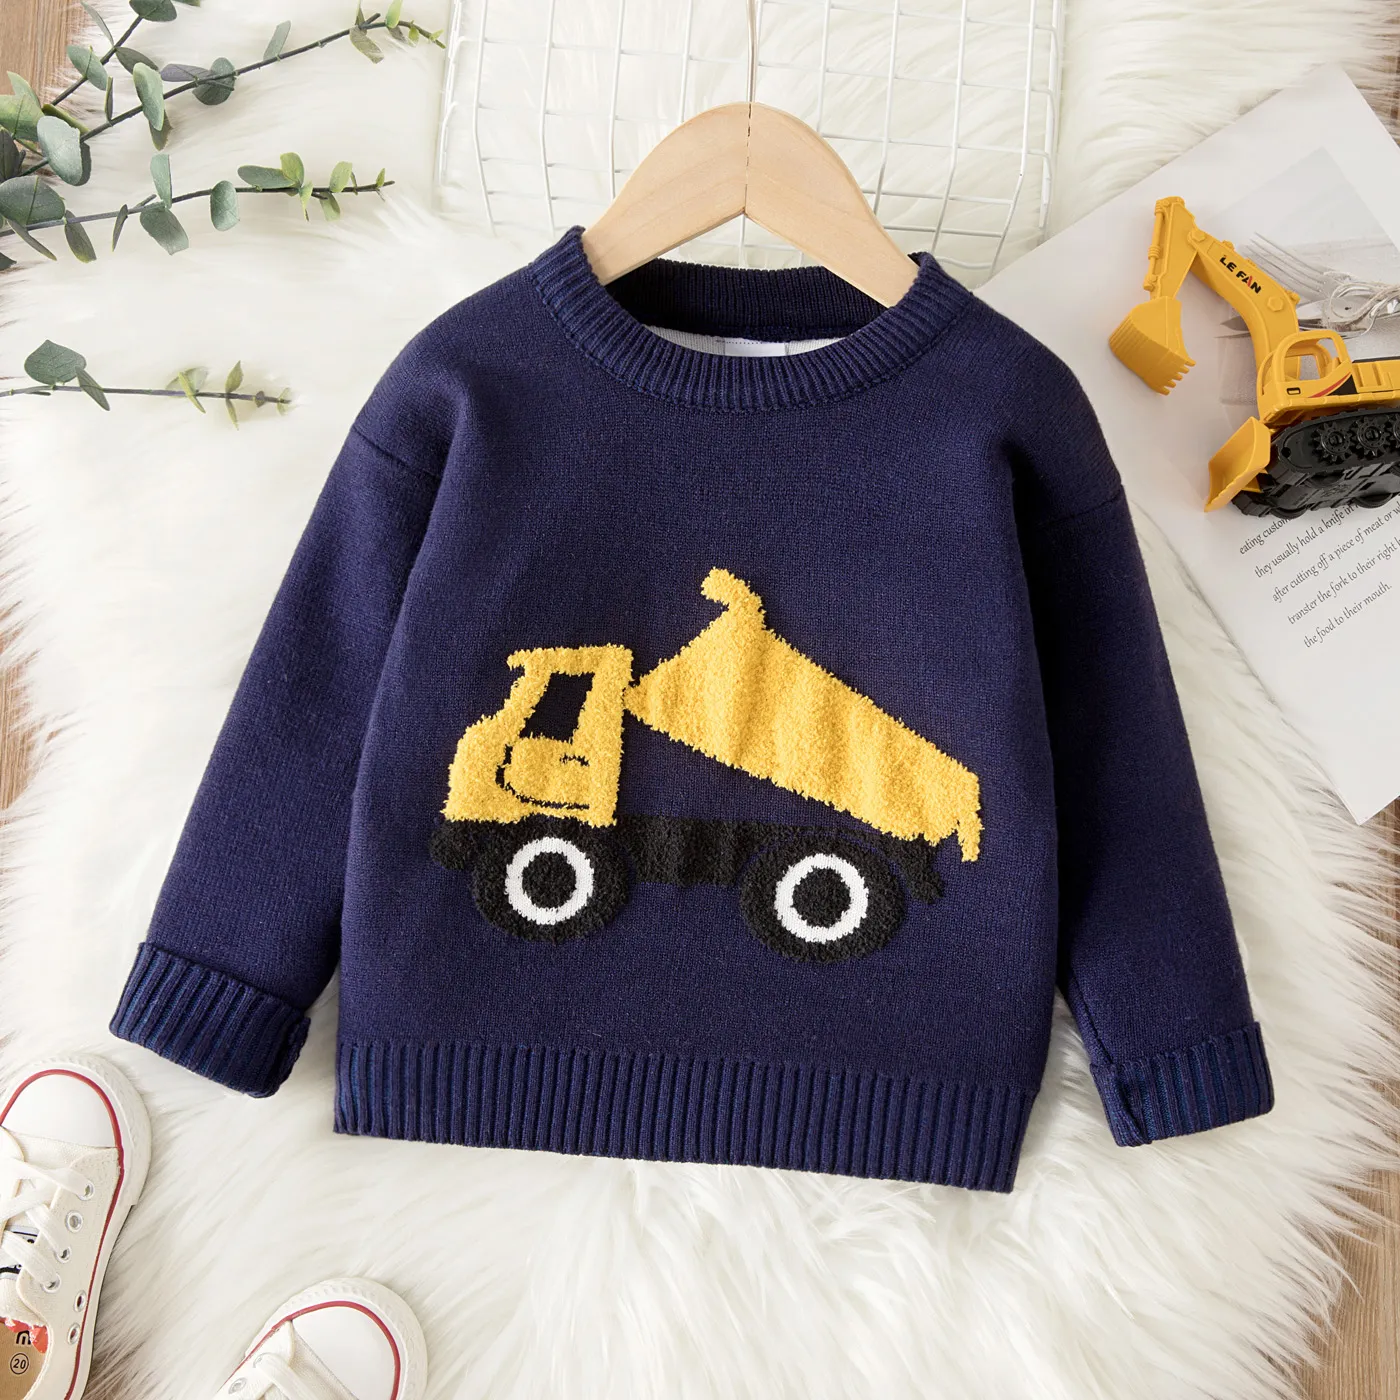 Toddler Boy Playful Vehicle Embroidered Knit Sweater Only €14.49